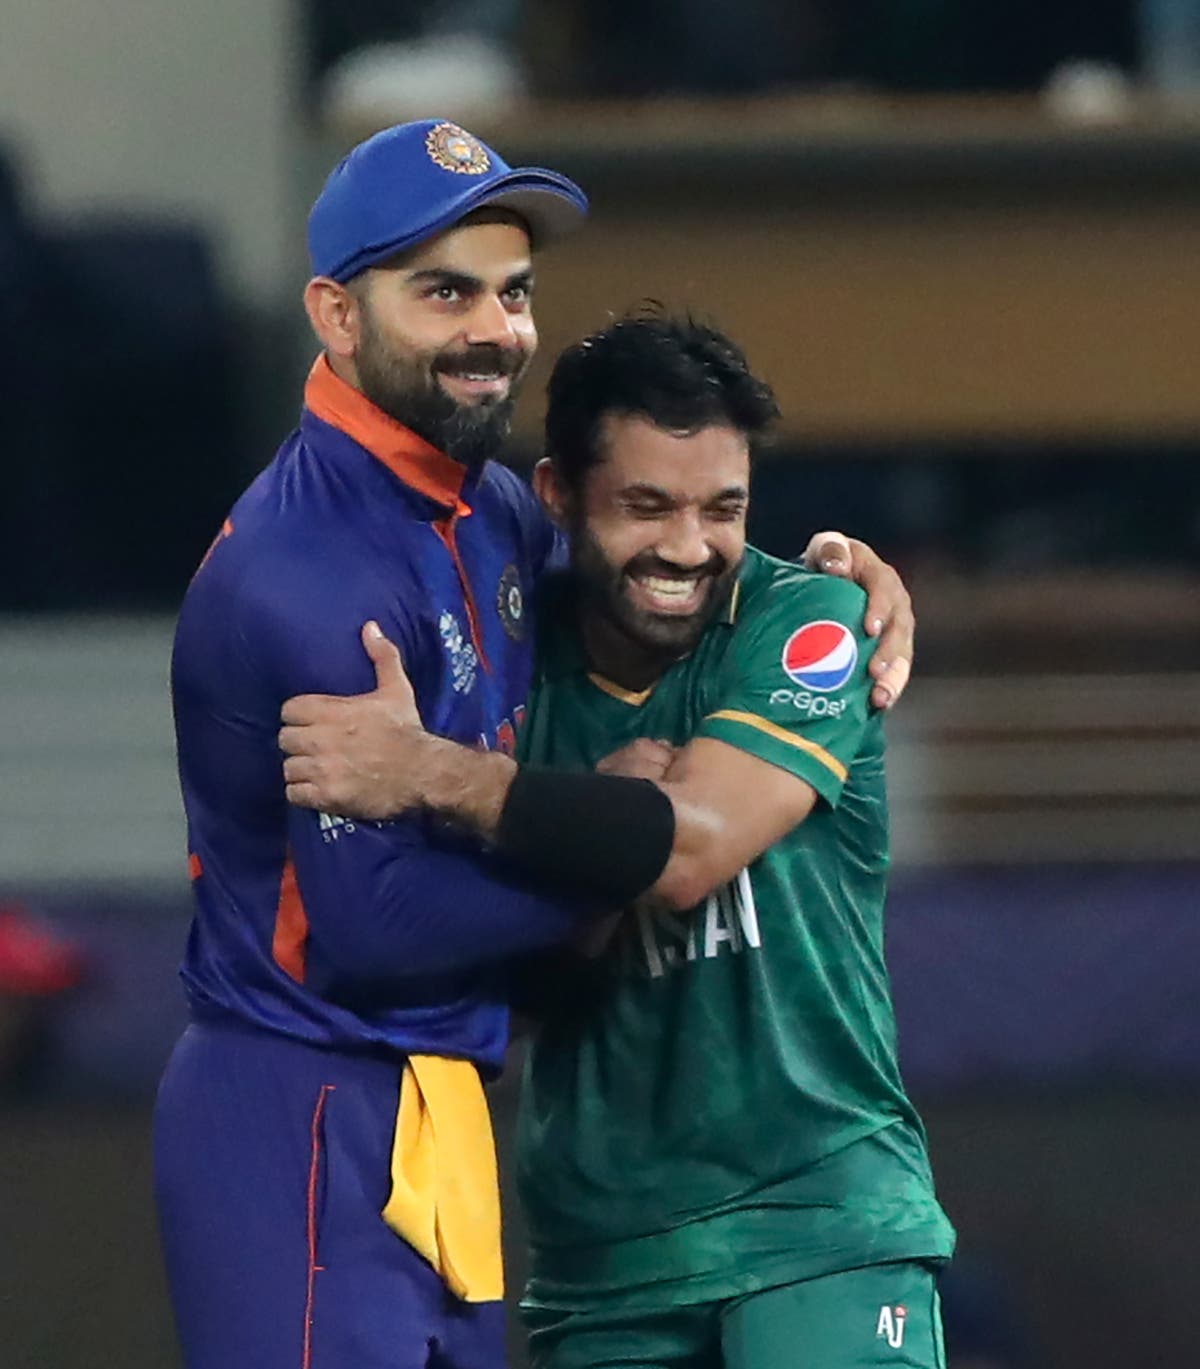 Virat Kohli says India were ‘definitely outplayed’ in T20 loss to Pakistan